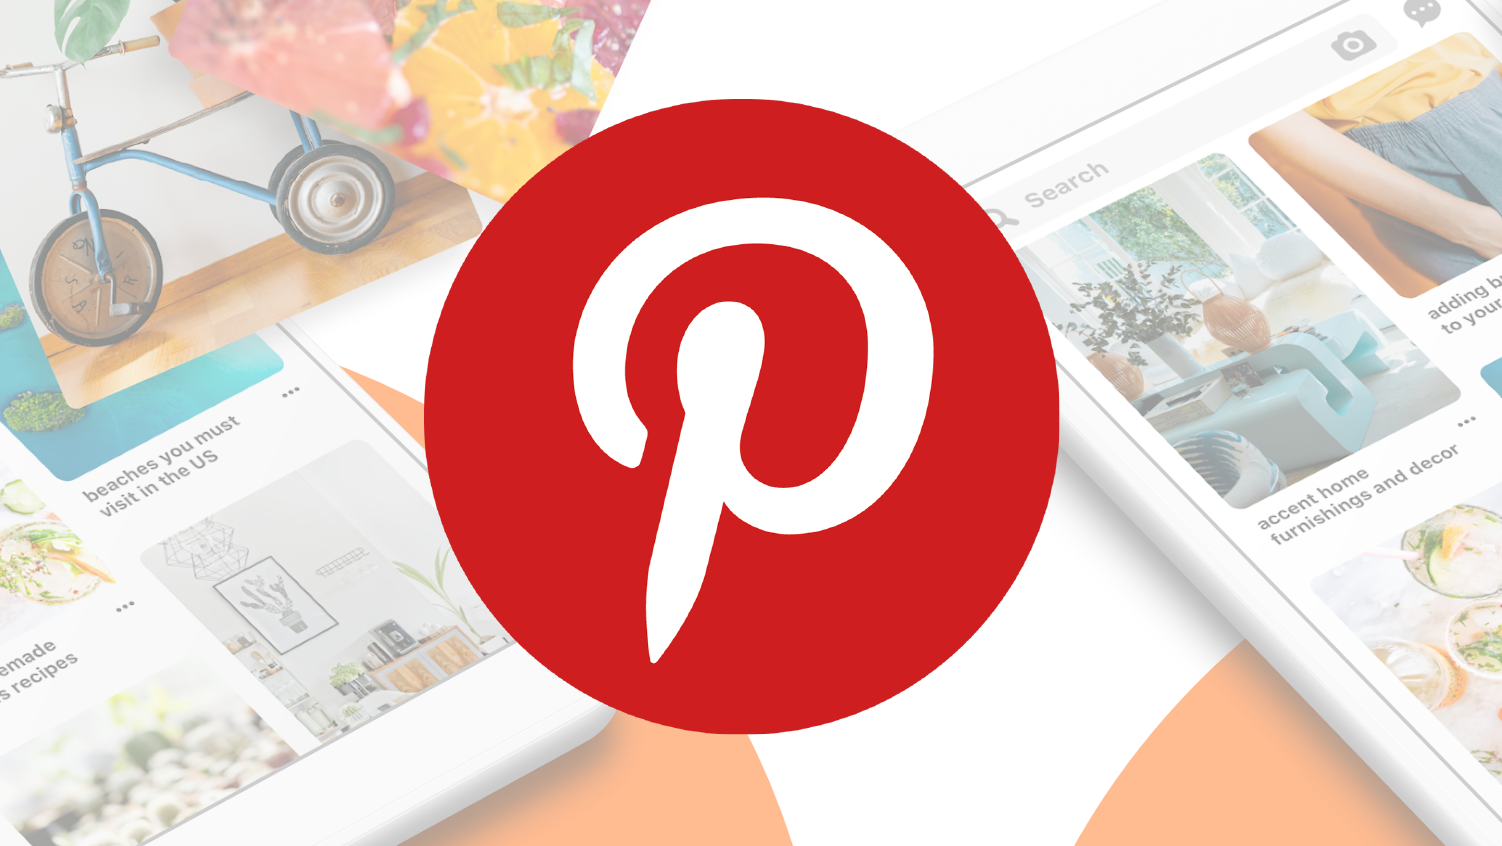 Pinterest has more than 500 million Play Store installs for some reason